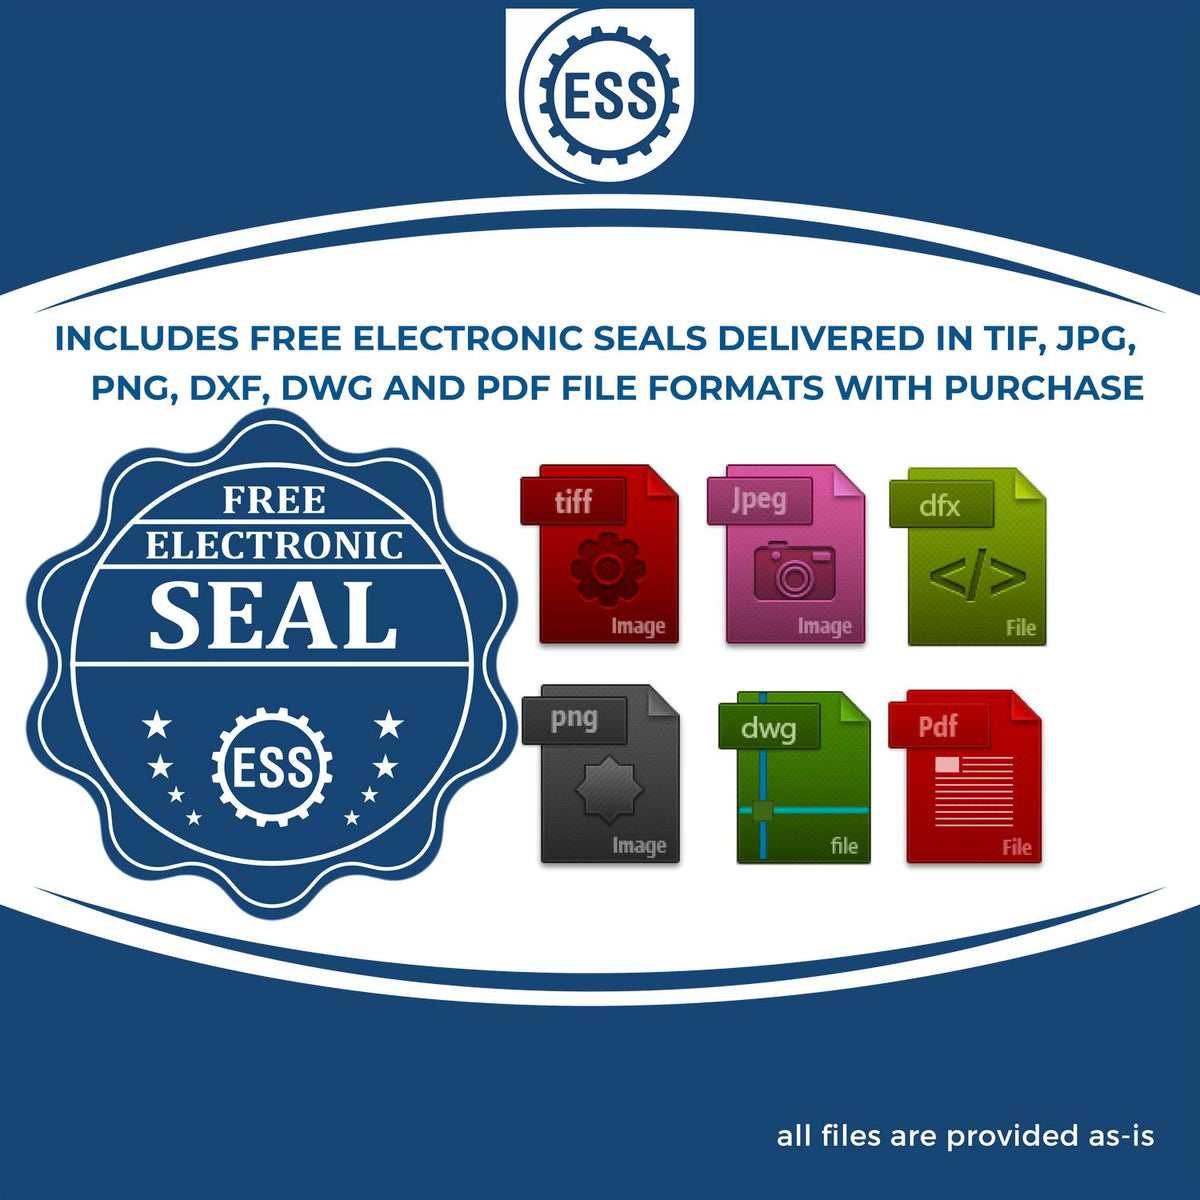 An infographic for the free electronic seal for the Gift Connecticut Geologist Seal illustrating the different file type icons such as DXF, DWG, TIF, JPG and PNG.